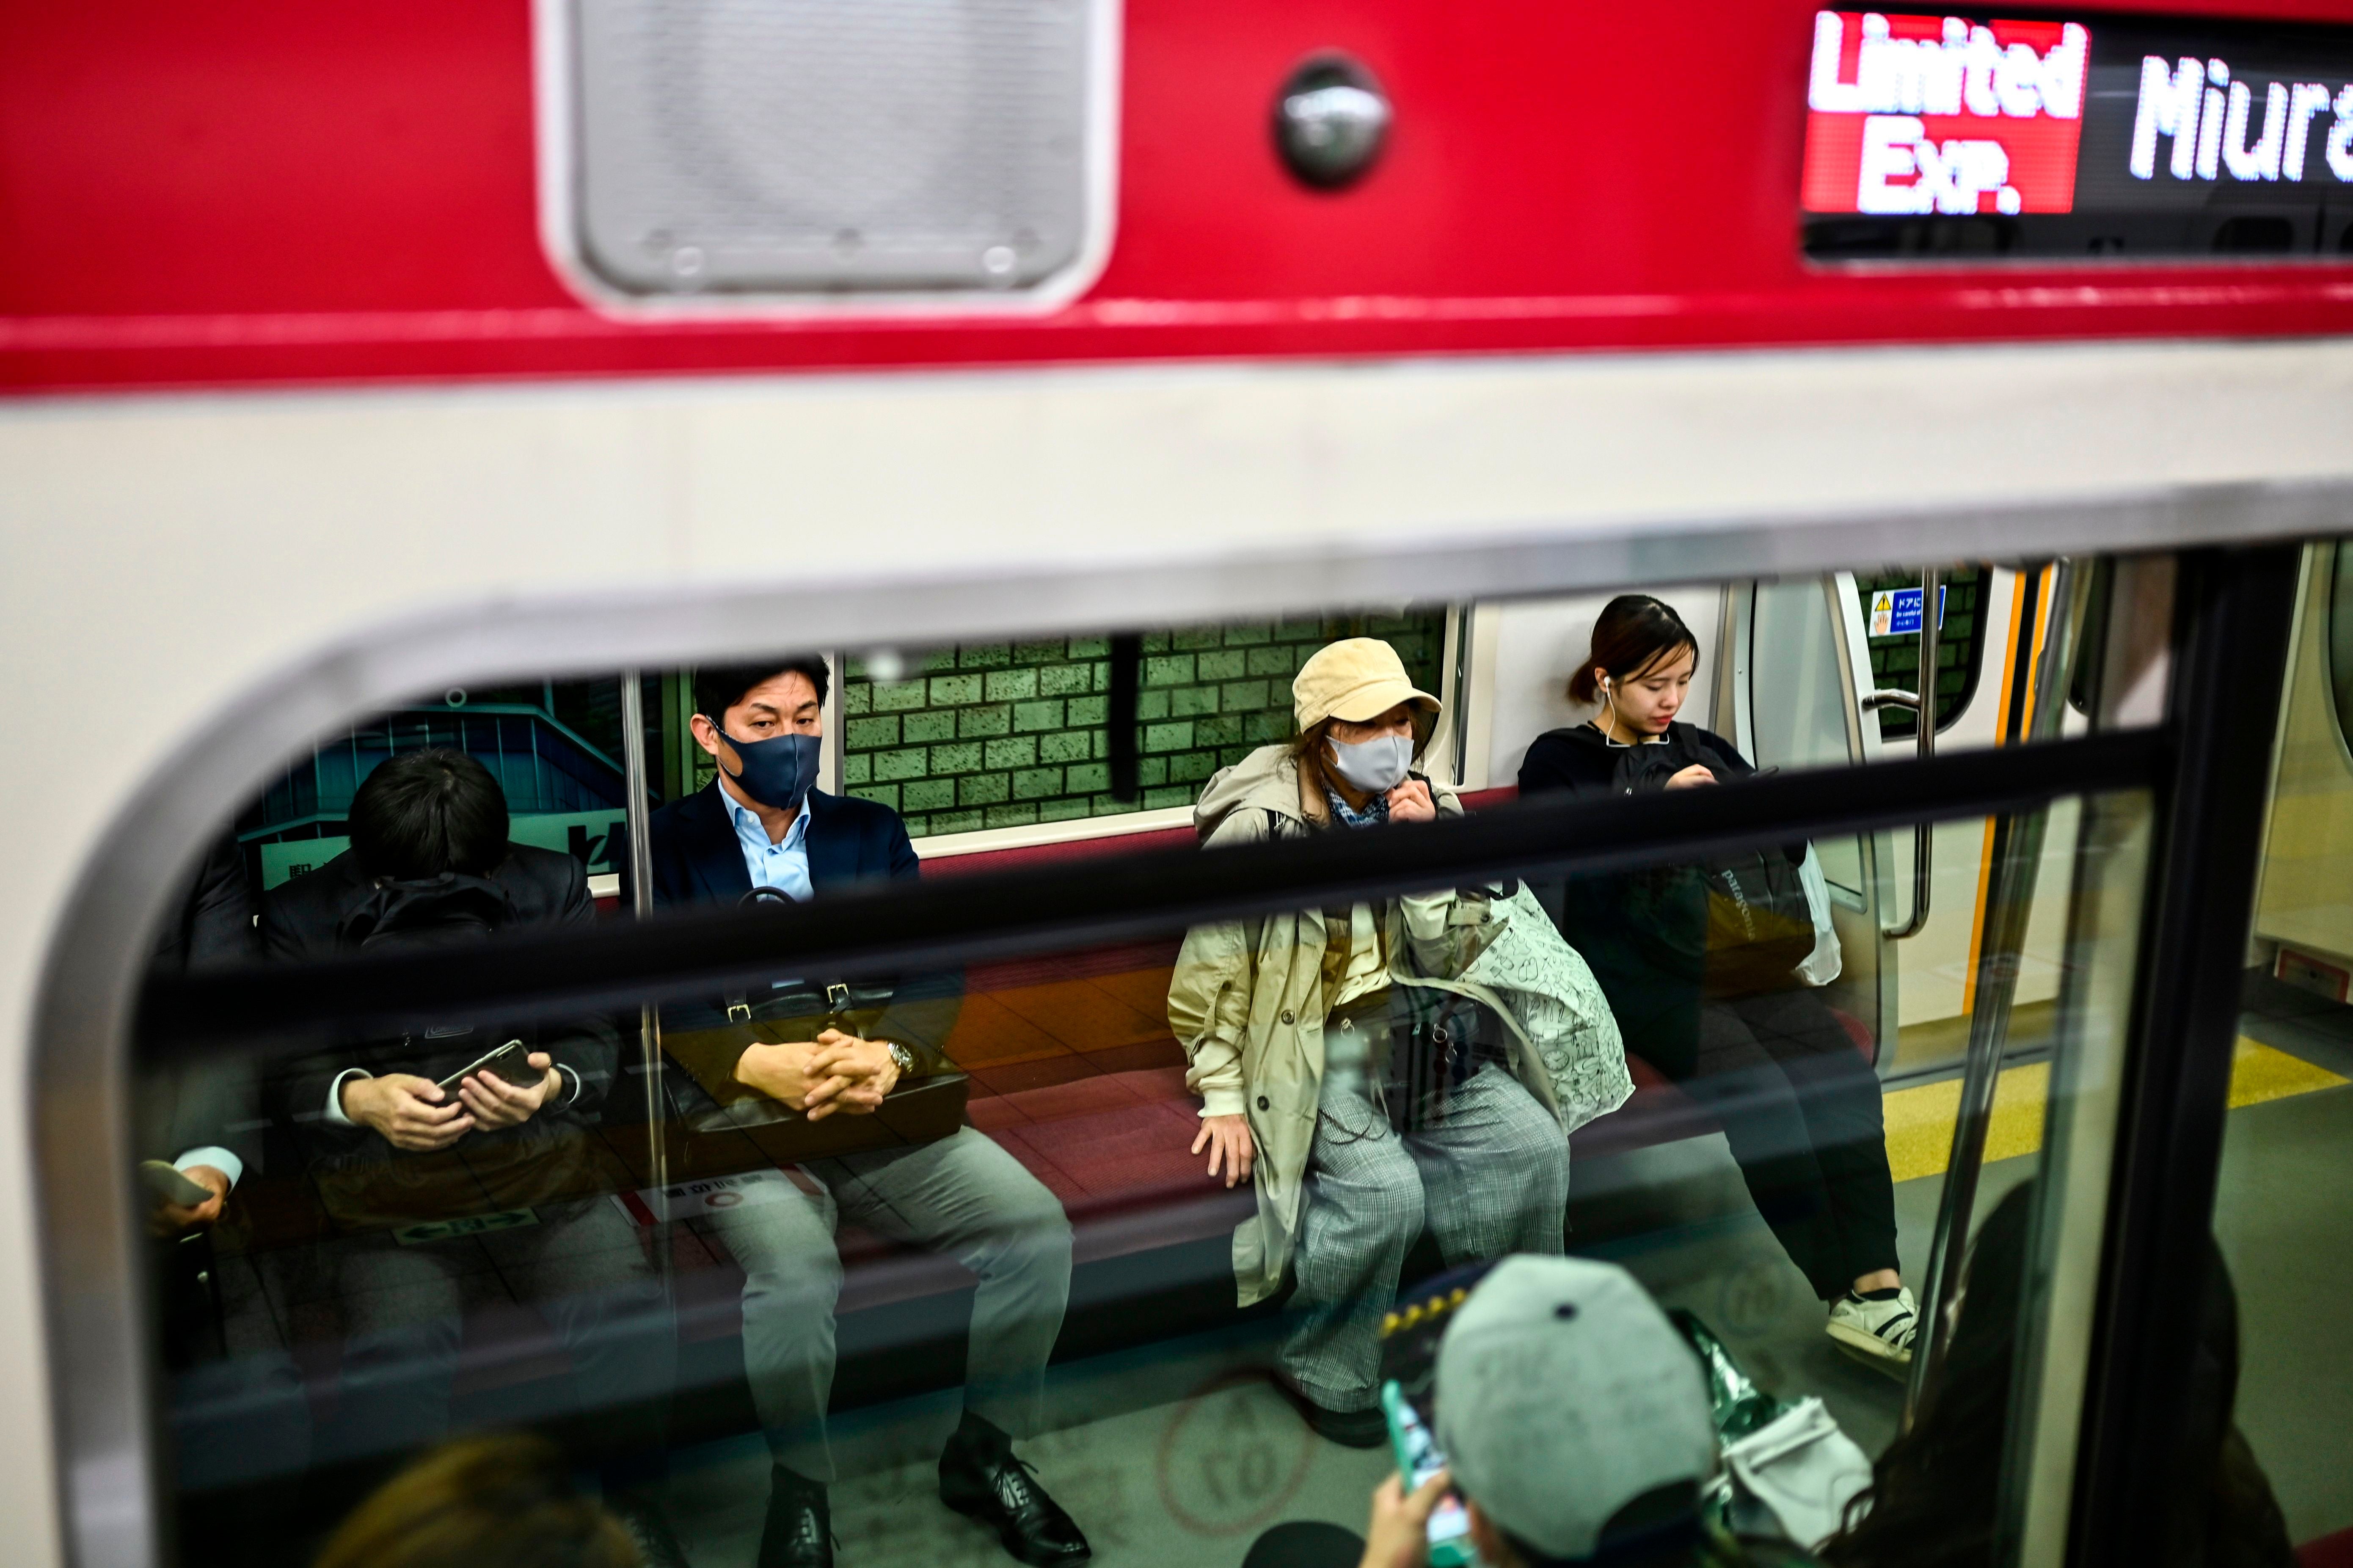 People wear face masks as a preventive measure against the Covid-19 coronavirus, commute late evening in Tokyo on 17 November, 2020.